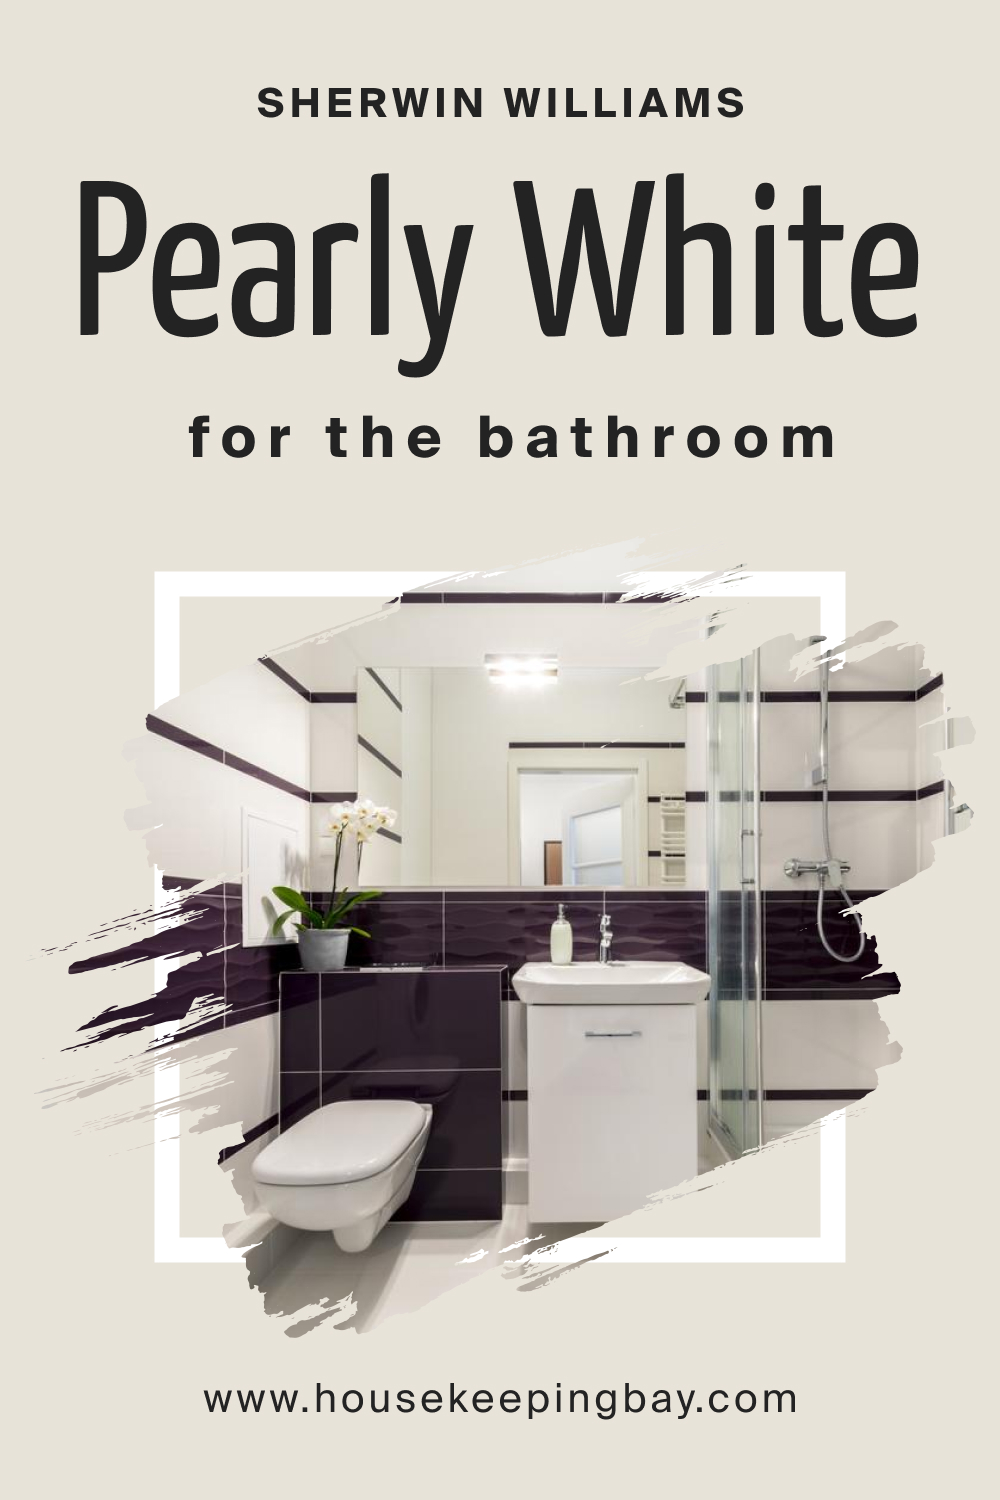 Sherwin Williams. SW Pearly White in the Bathroom